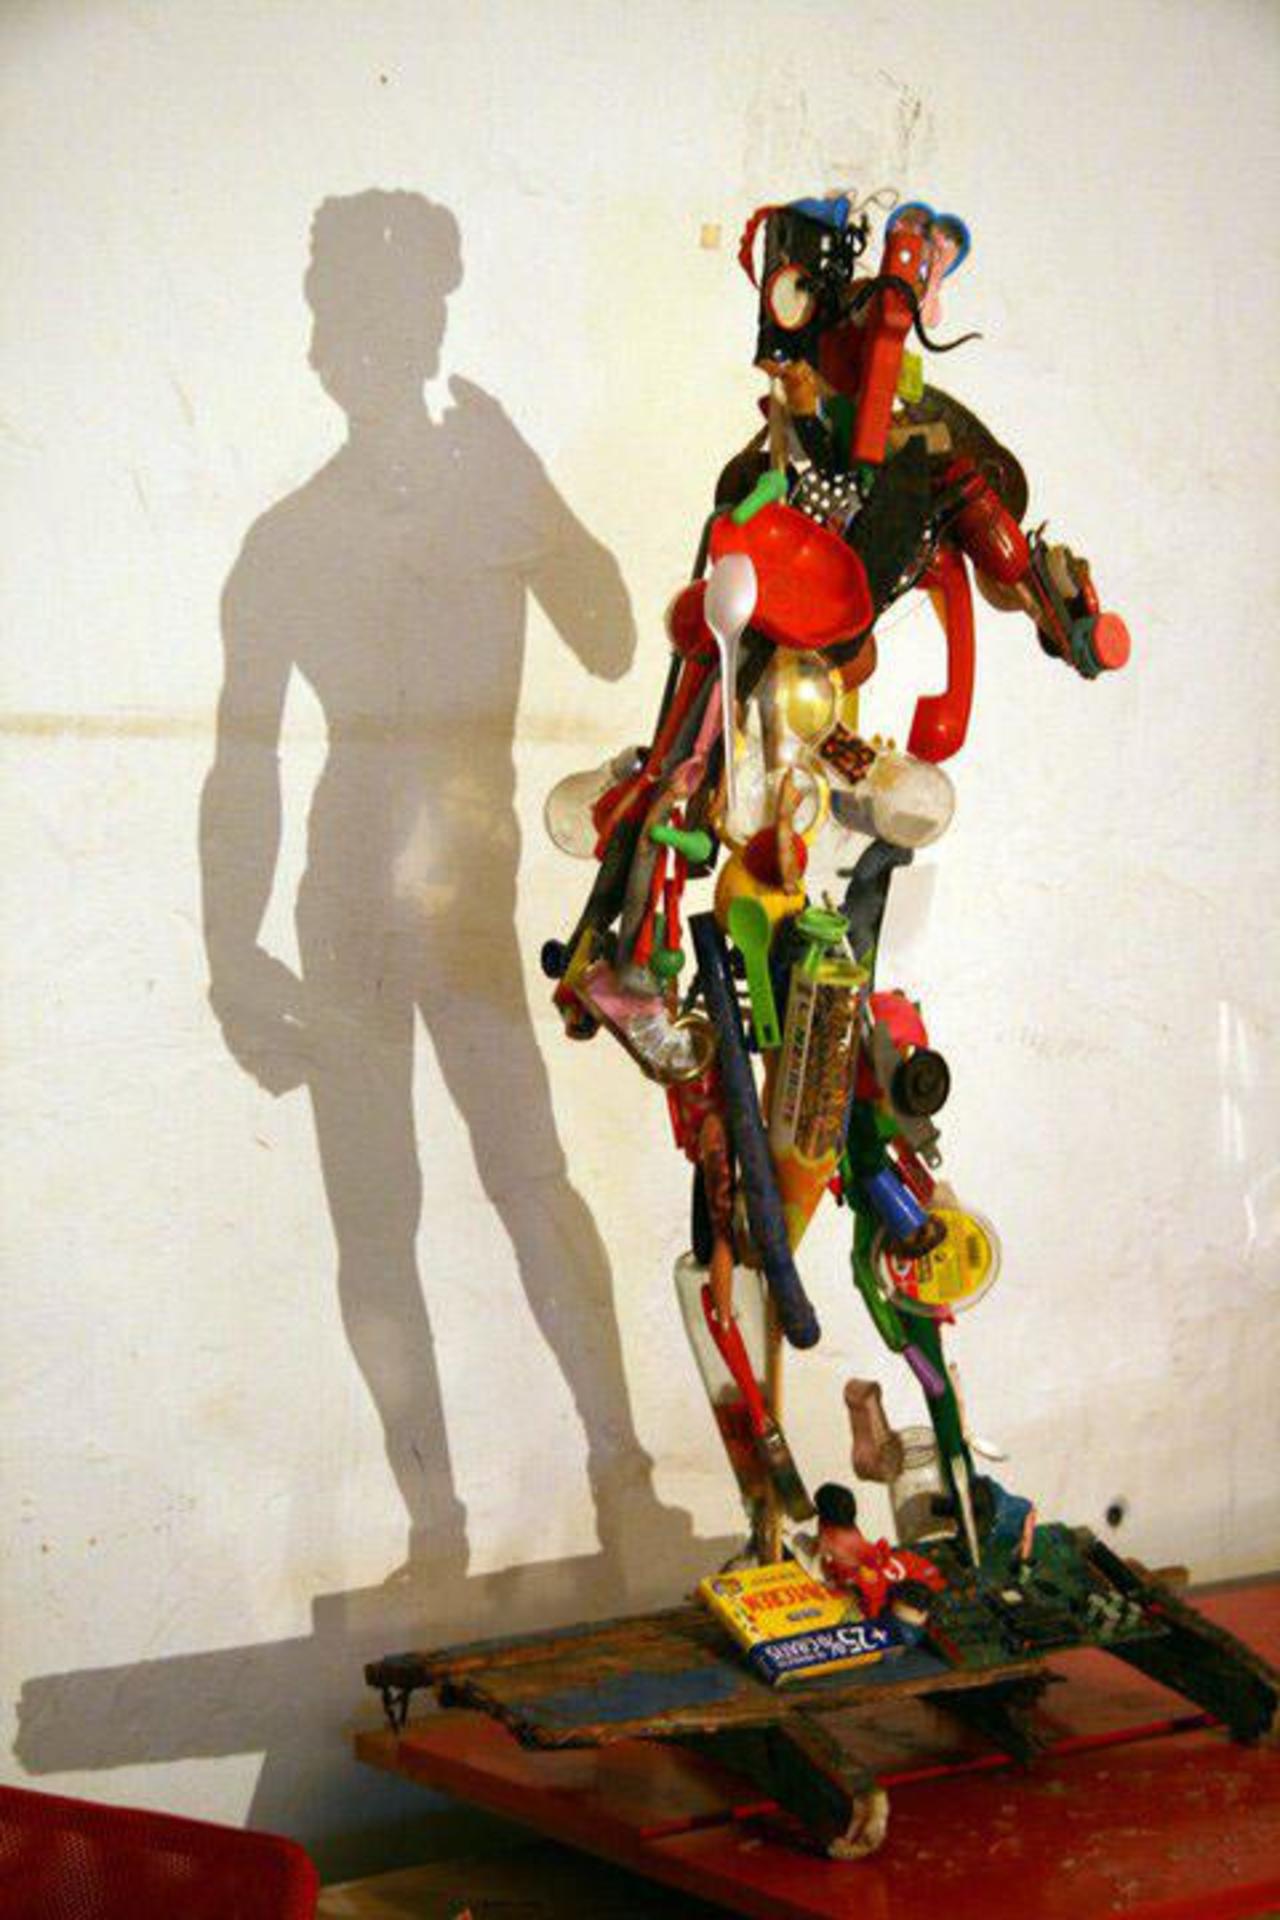 We love these amazing #art installations made from broken toys, driftwood, viynls and computer parts! @irecyclart http://t.co/5VjVK5VLN6